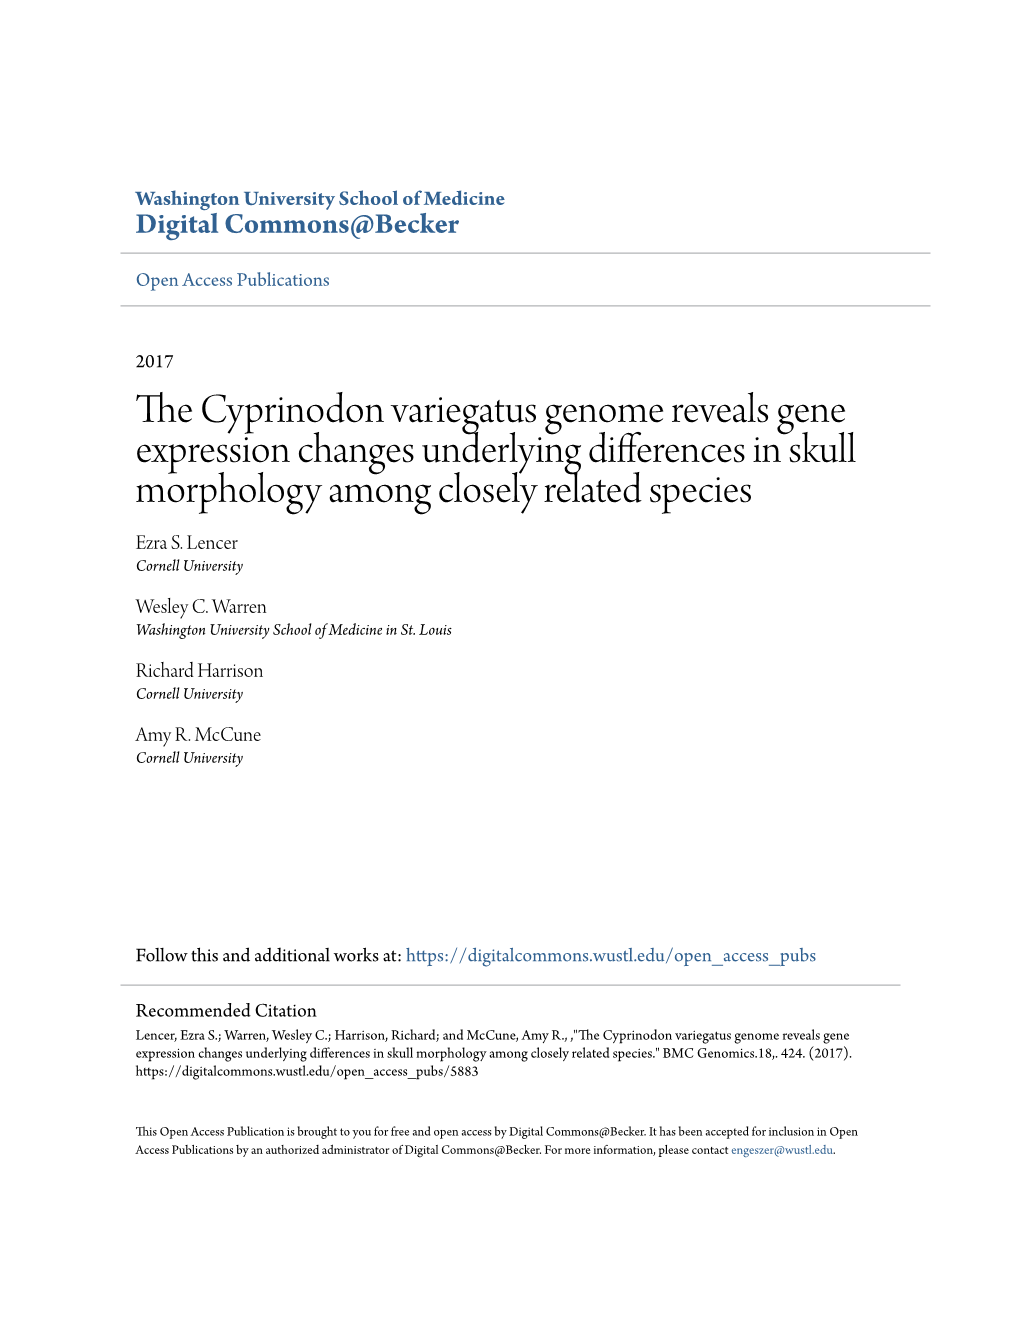 The Cyprinodon Variegatus Genome Reveals Gene Expression Changes Underlying Differences in Skull Morphology Among Closely Related Species Ezra S